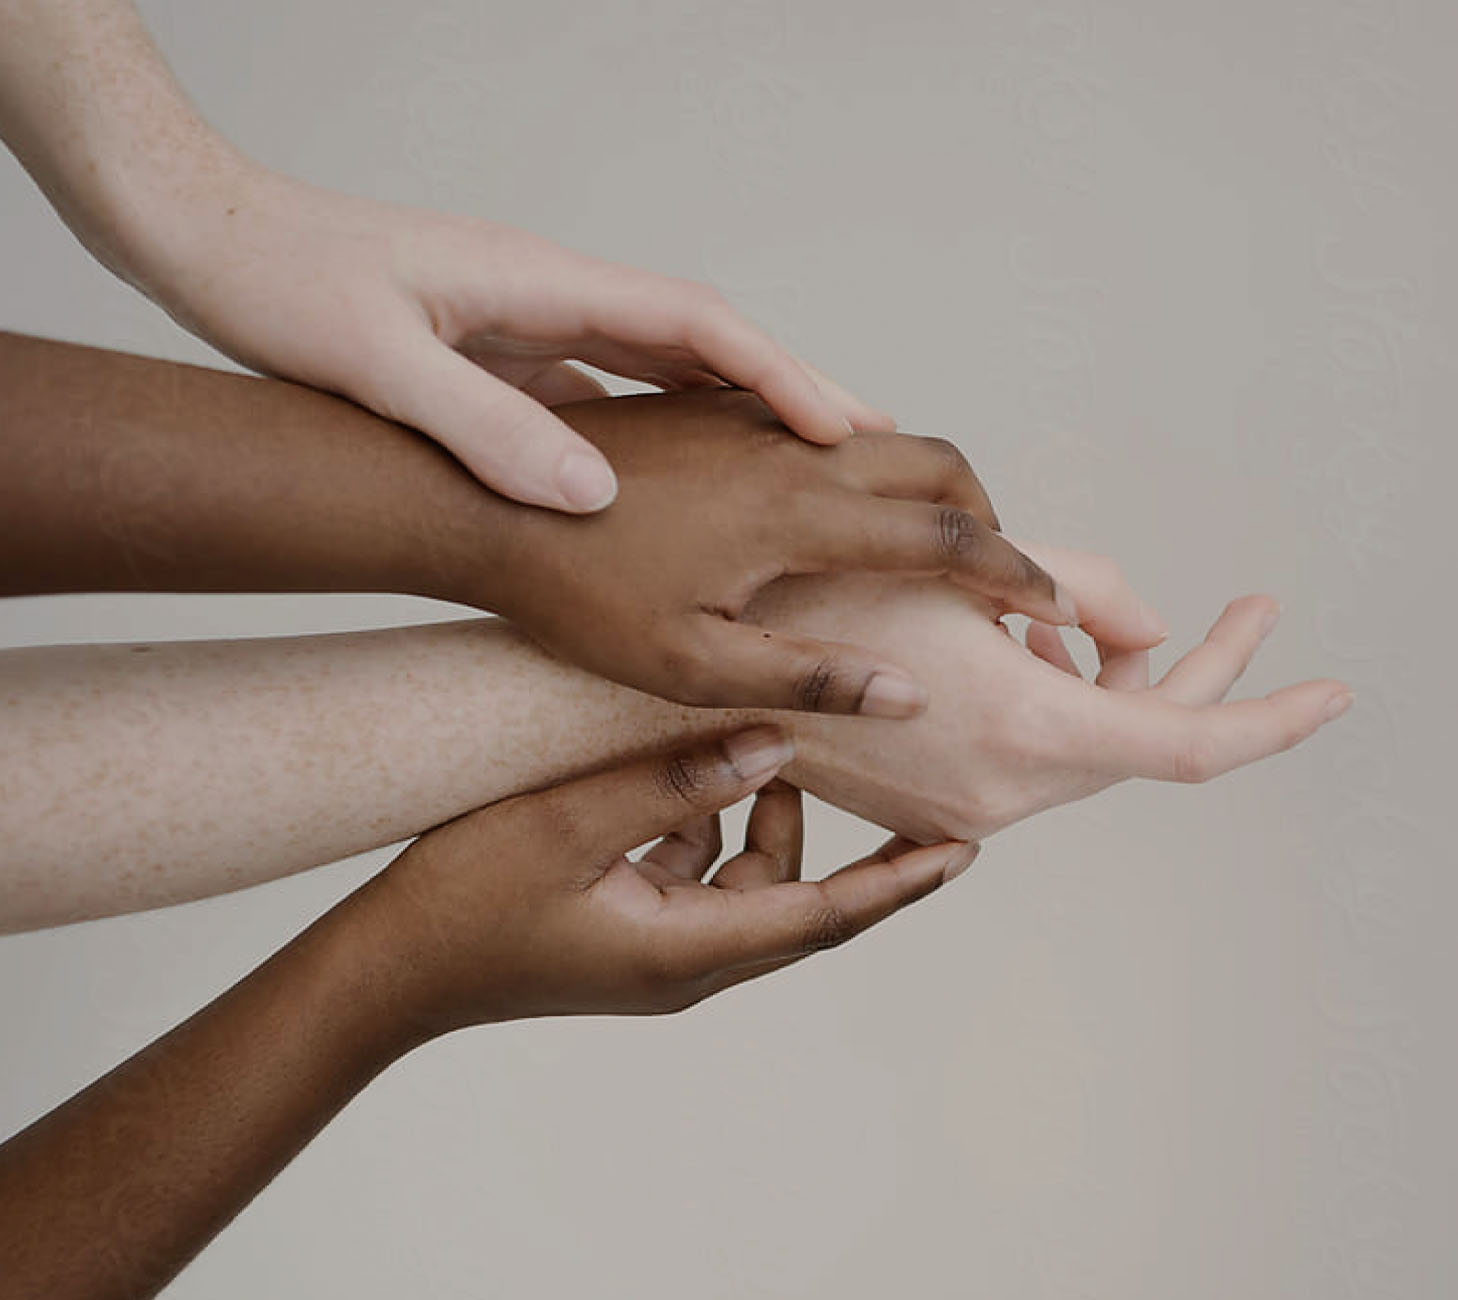 Four hands with diverse skin tones reach together.